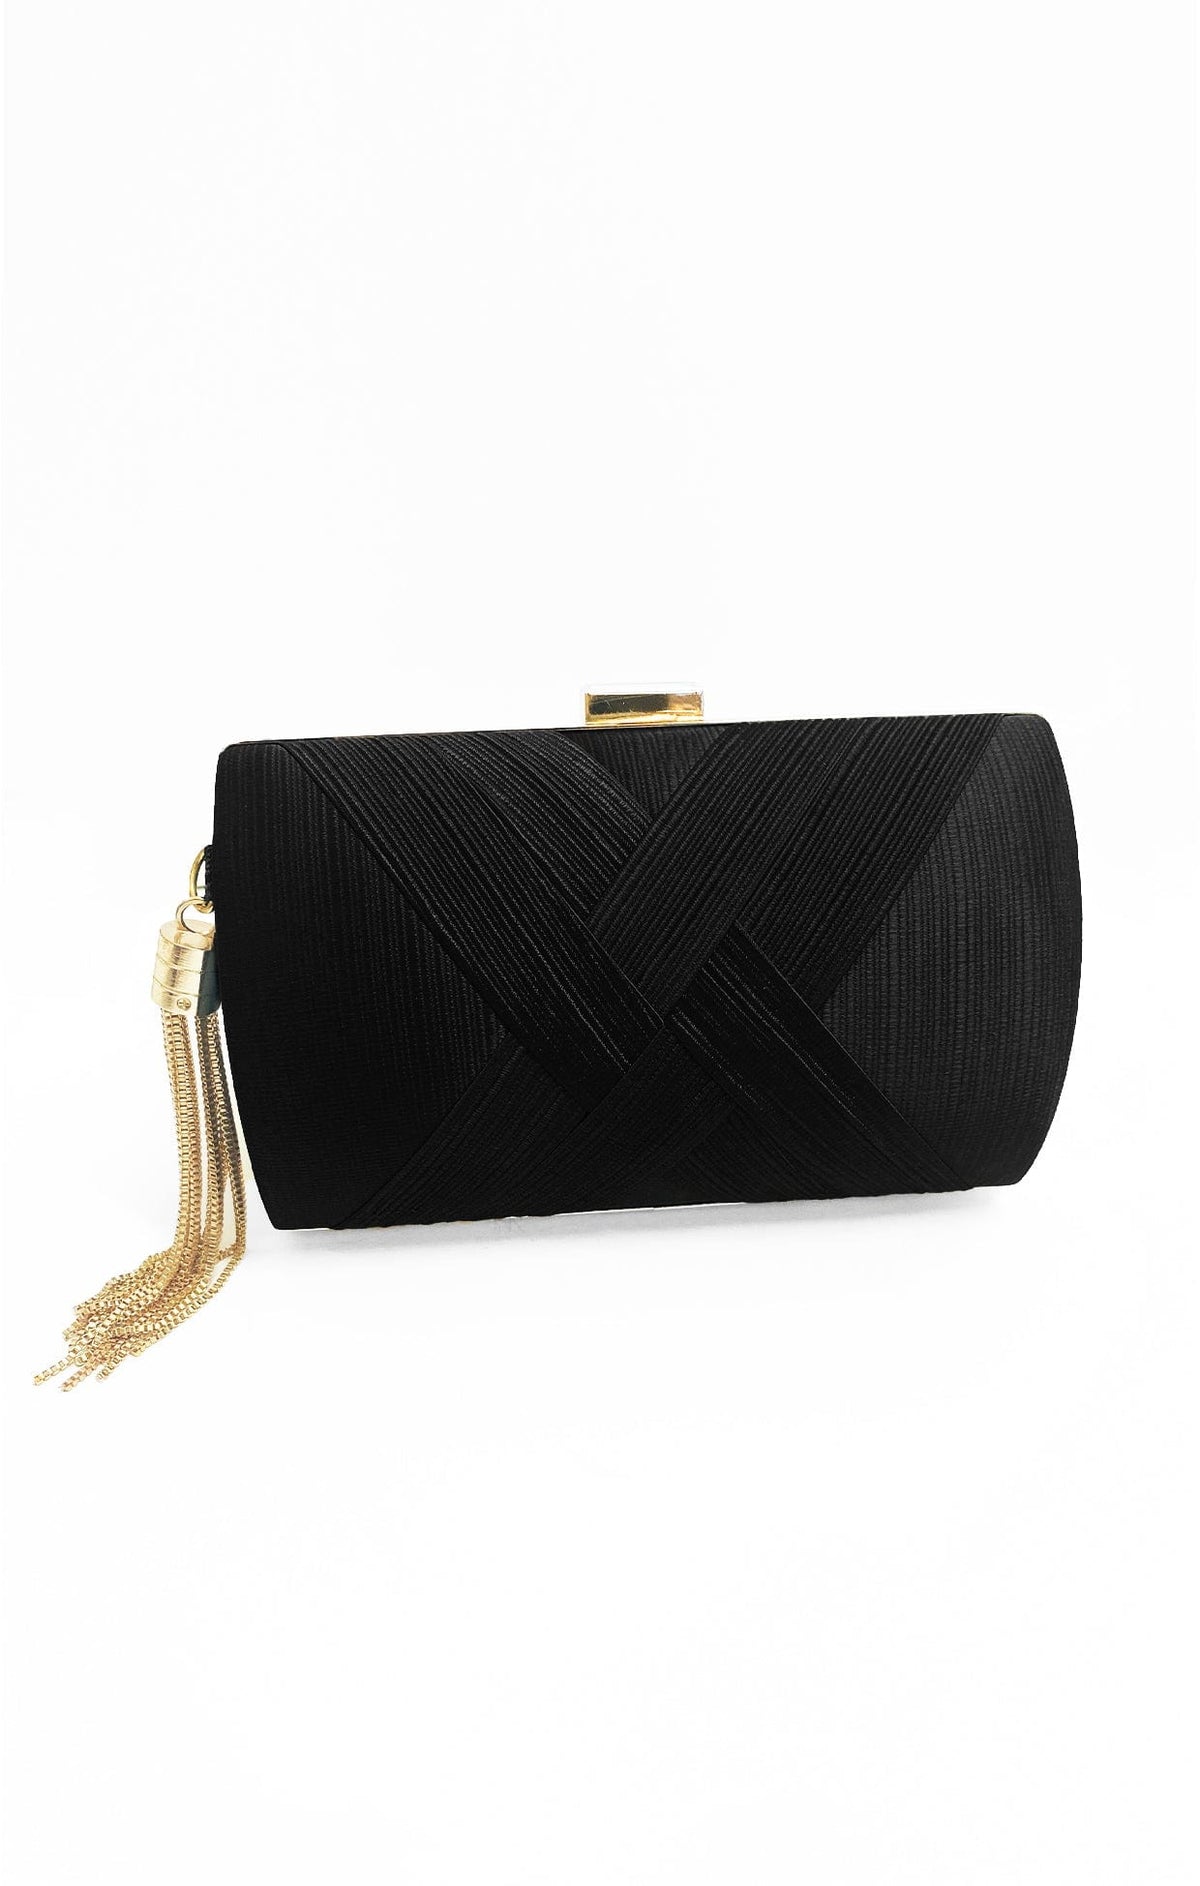 ACCESSORIES Bags Clutches One Size / Black DEANNA EVENING BAG IN BLACK